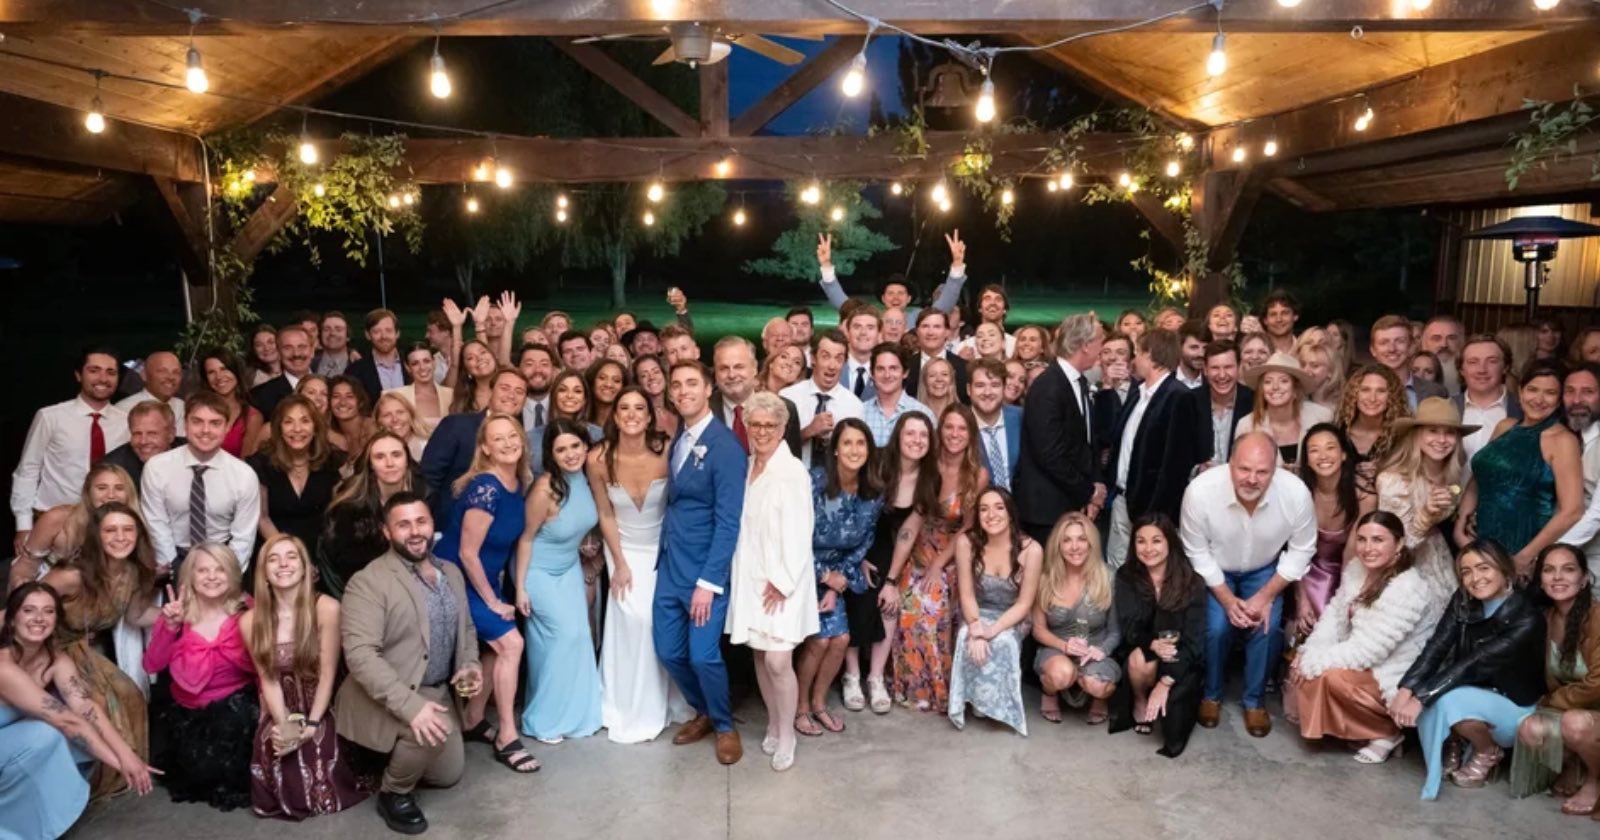 Photographer Was Not Doing His Job: Group Wedding Photo Sparks Debate